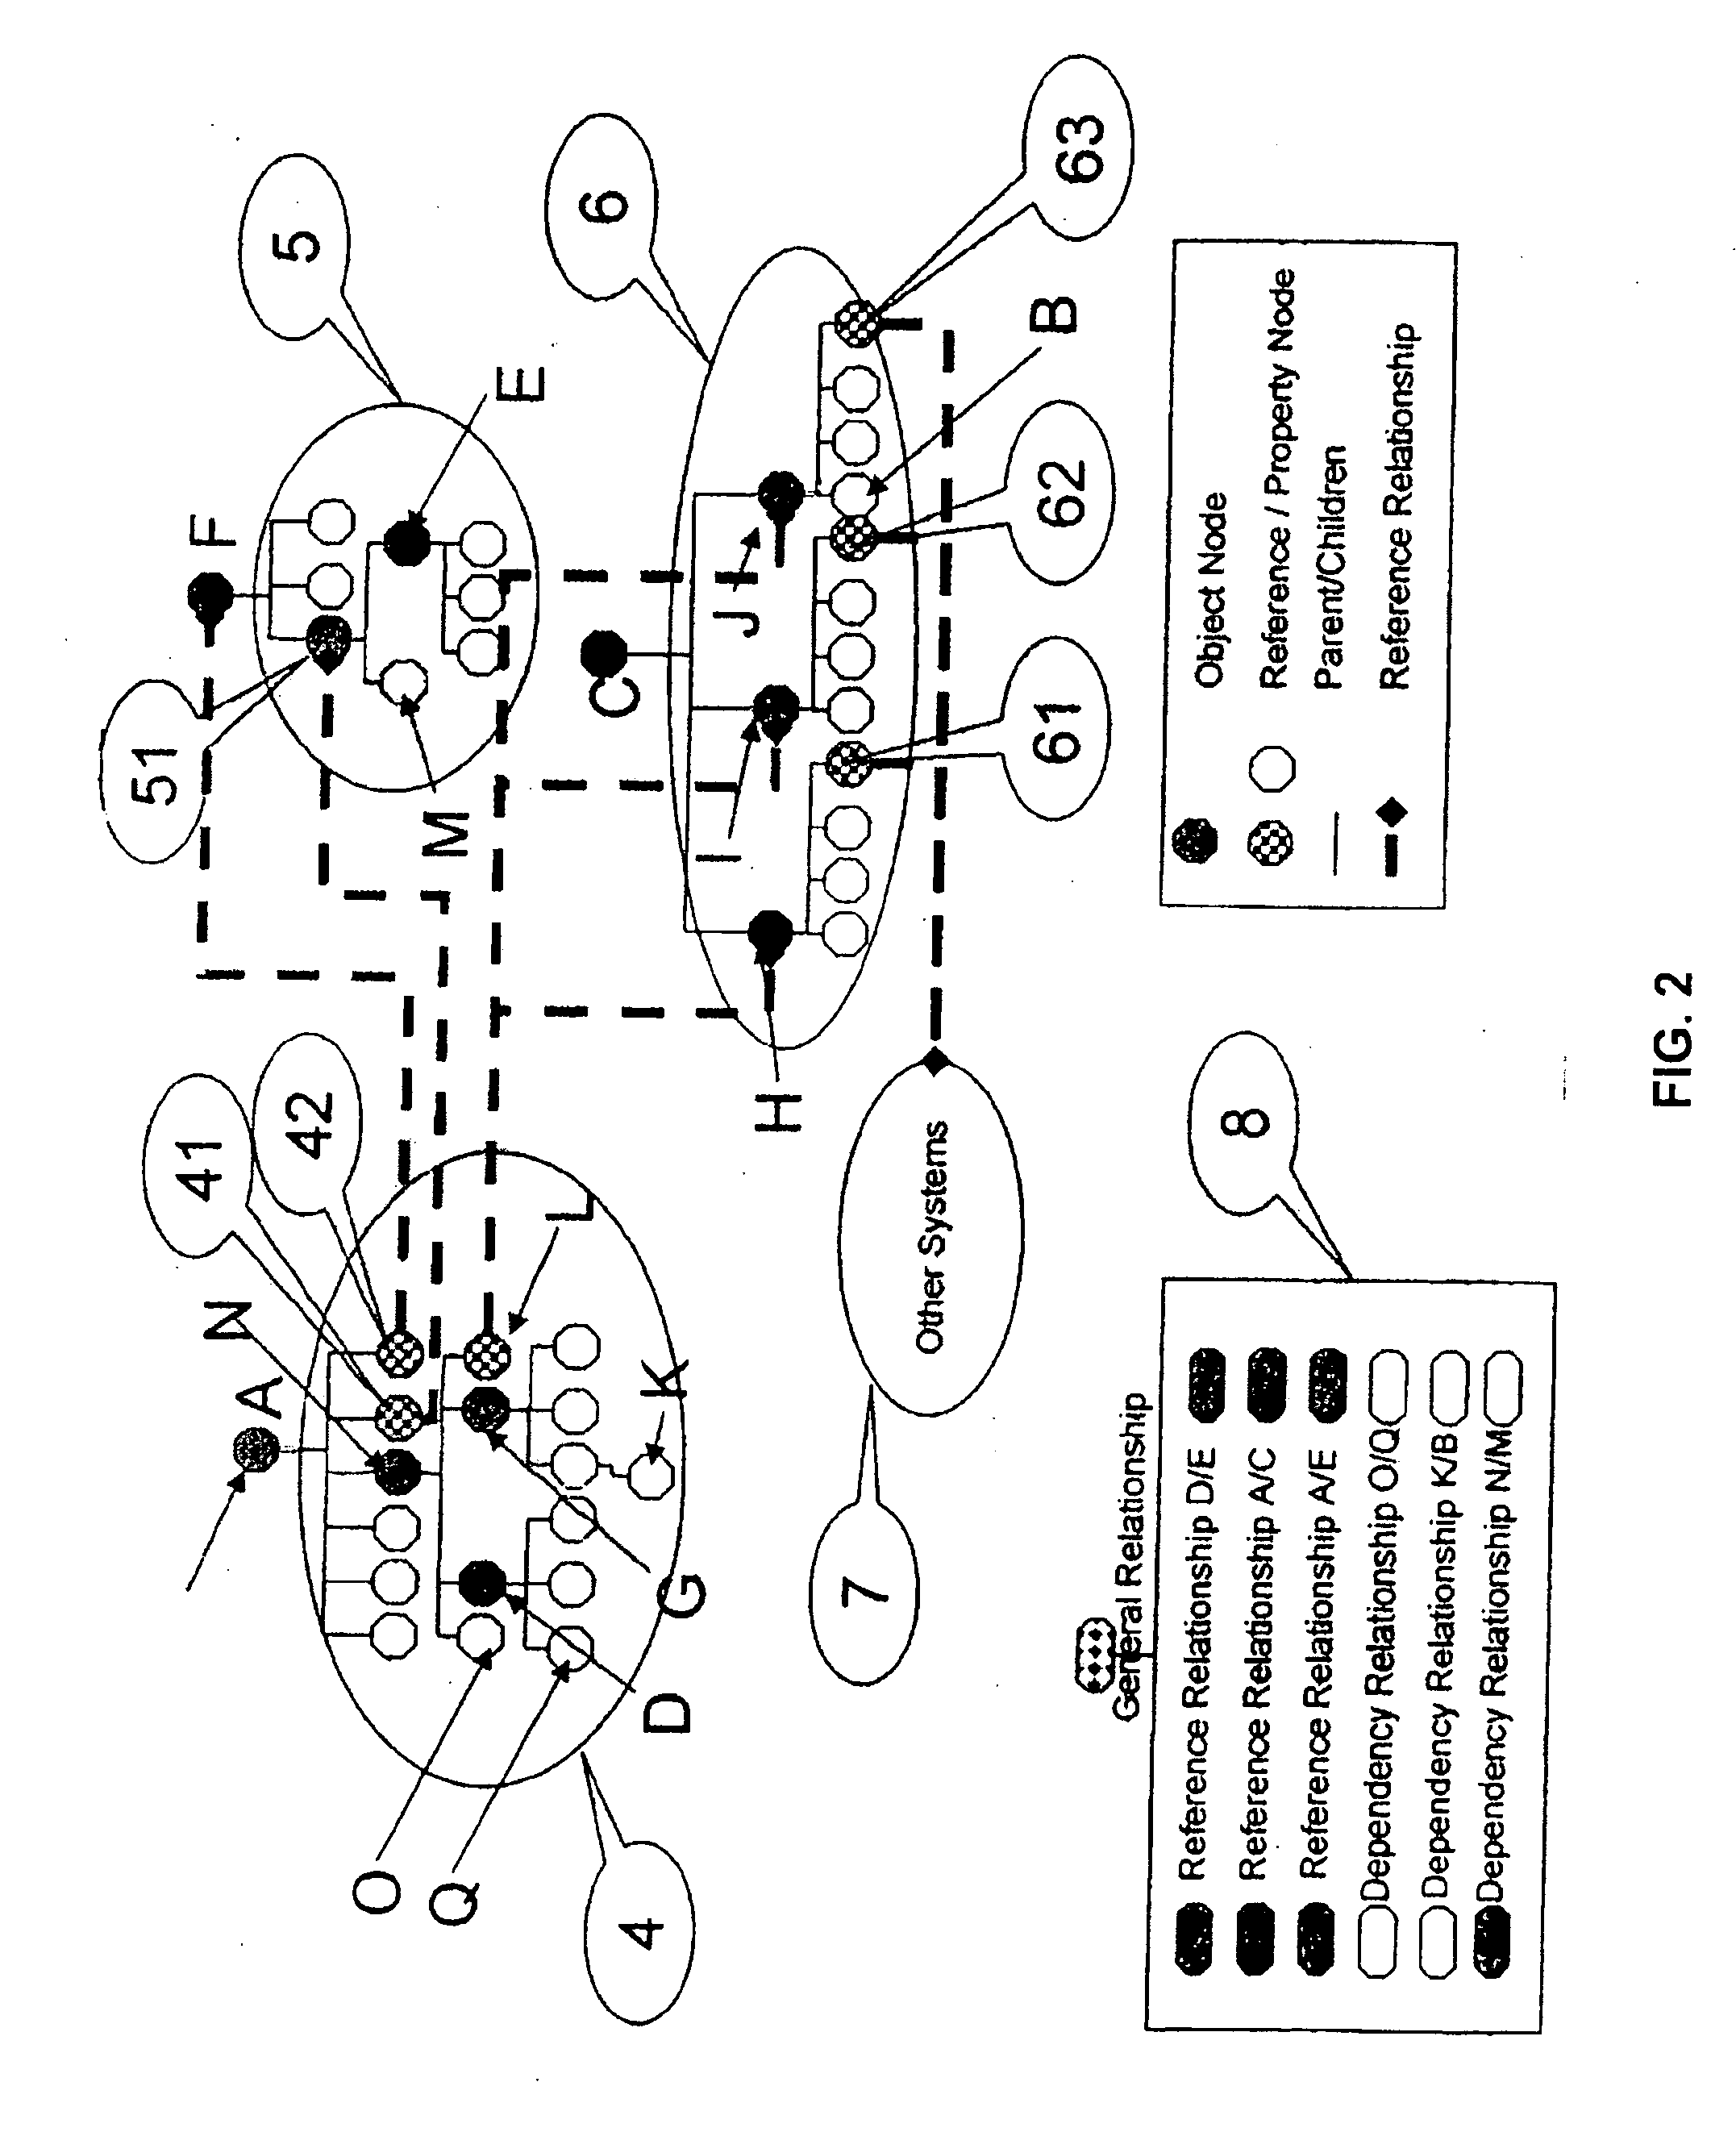 Method of compact display combined with property-table-view for a complex relational data structure